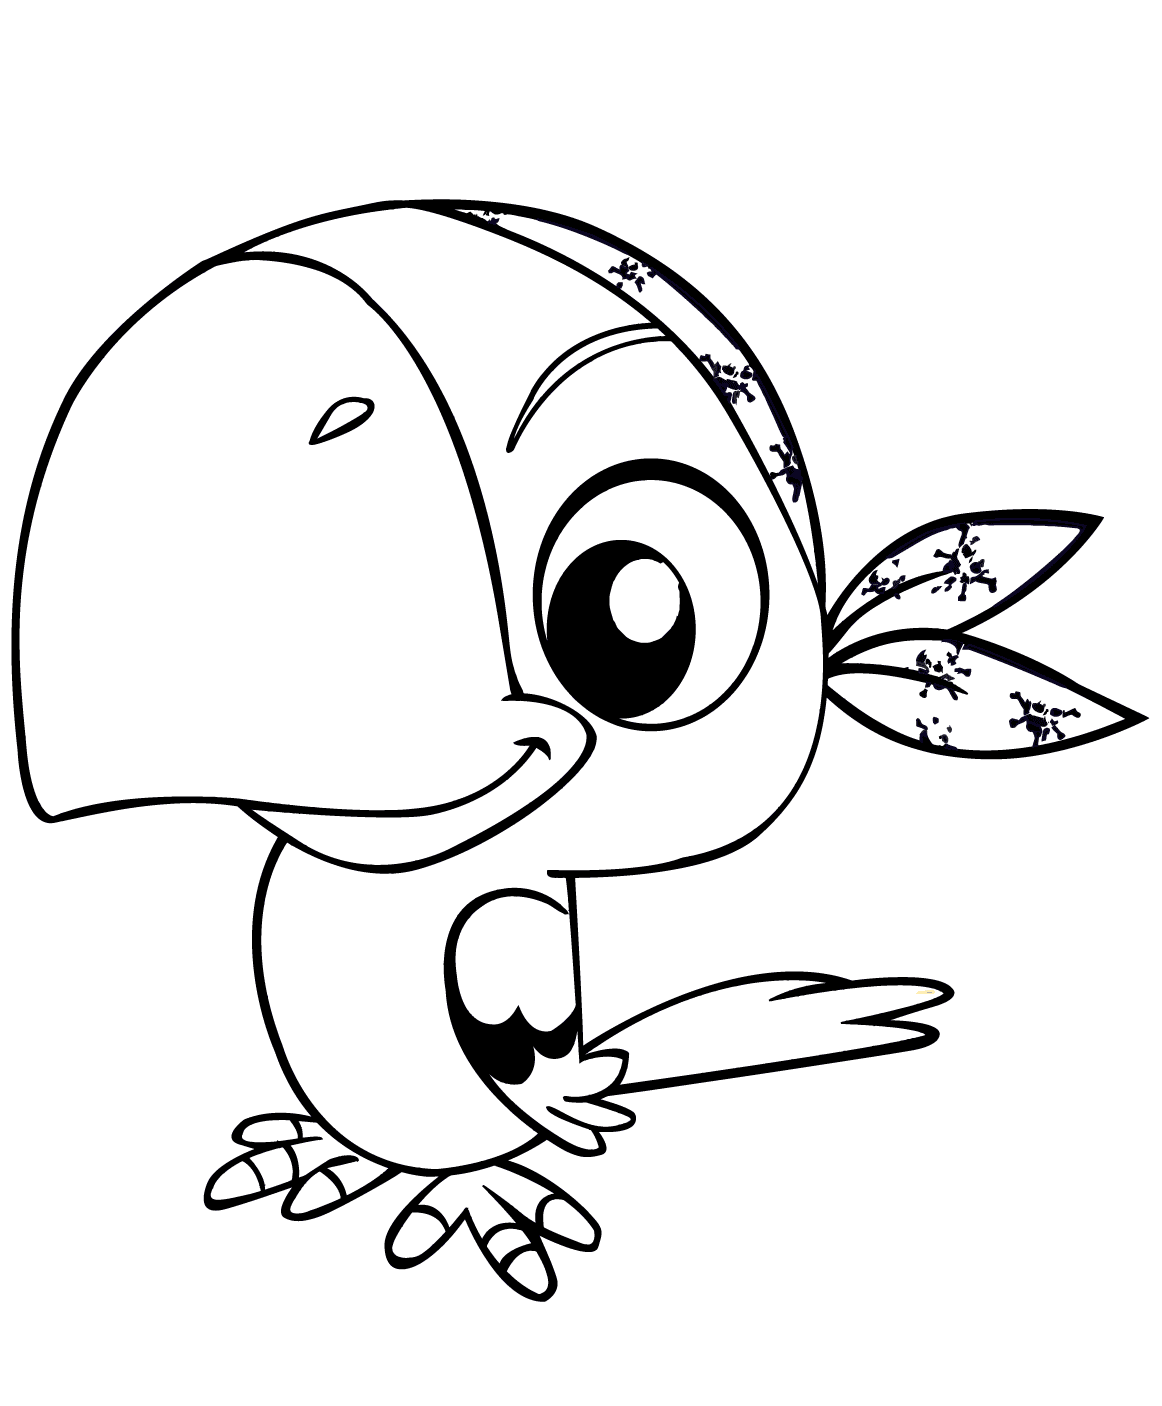 Pirate parrot coloring page